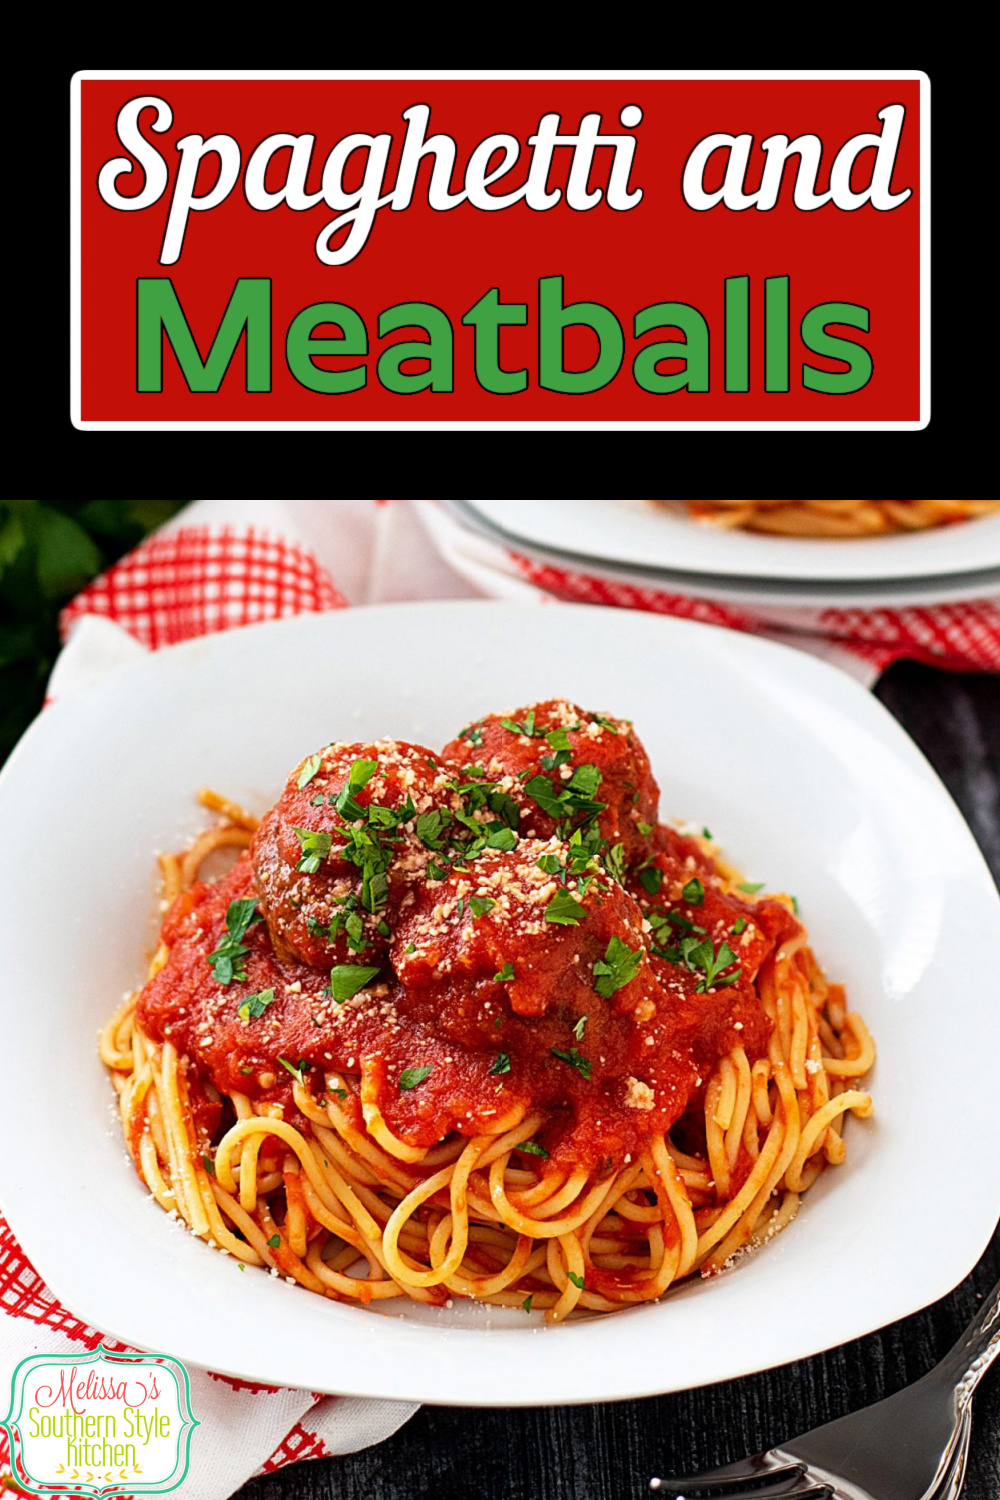 Homemade Spaghetti and Meatballs perfect for any night of the week #spaghettiandmeatballs #spgahettirecipes #meatballs #meatballrecipes #Italianmeatballs #southernrecipes #pastarecipes #spaghetti via @melissasssk